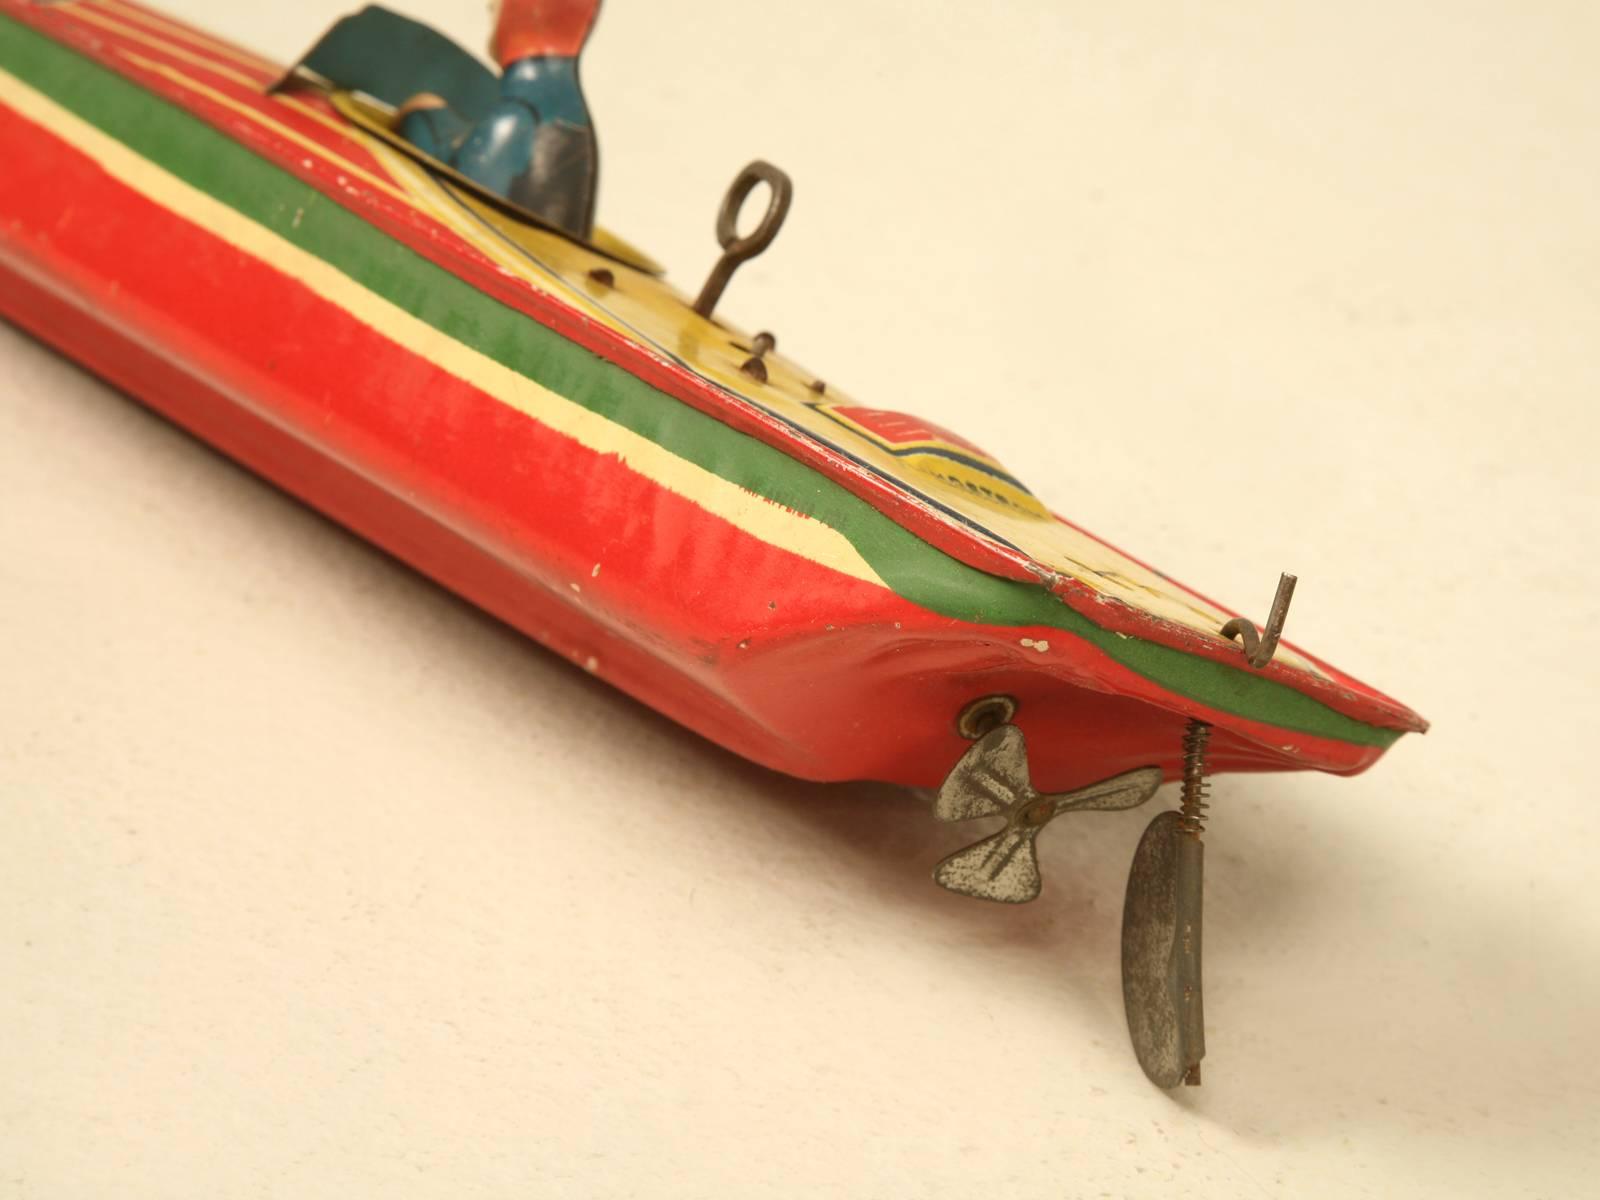 lindstrom toy boats